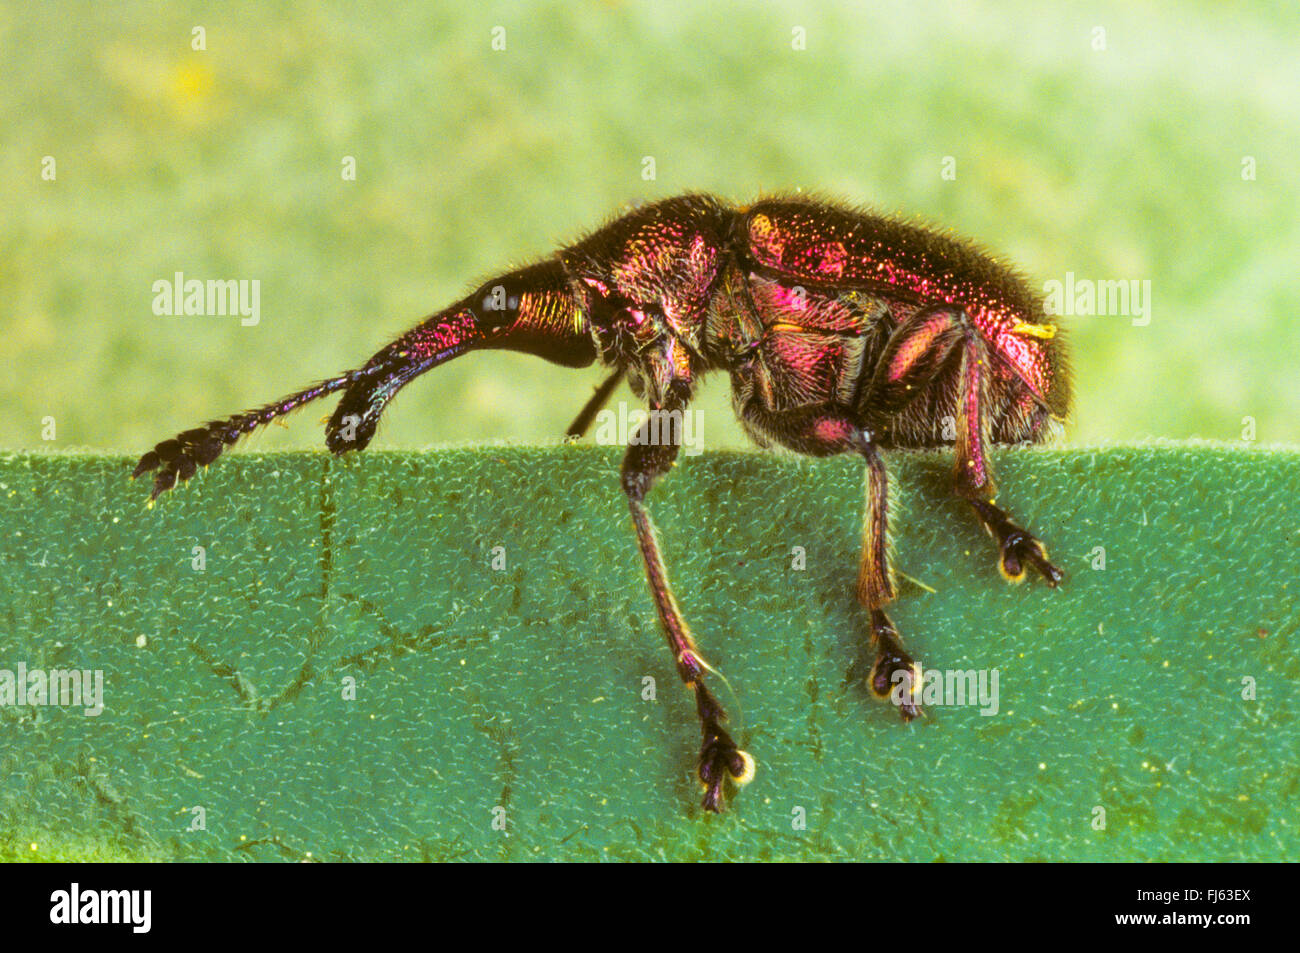 Poplar leaf roller weevil, Leaf-rolling weevil (Byctiscus populi, Bytiscus populi), sits on the edge of a leaf, Germany Stock Photo